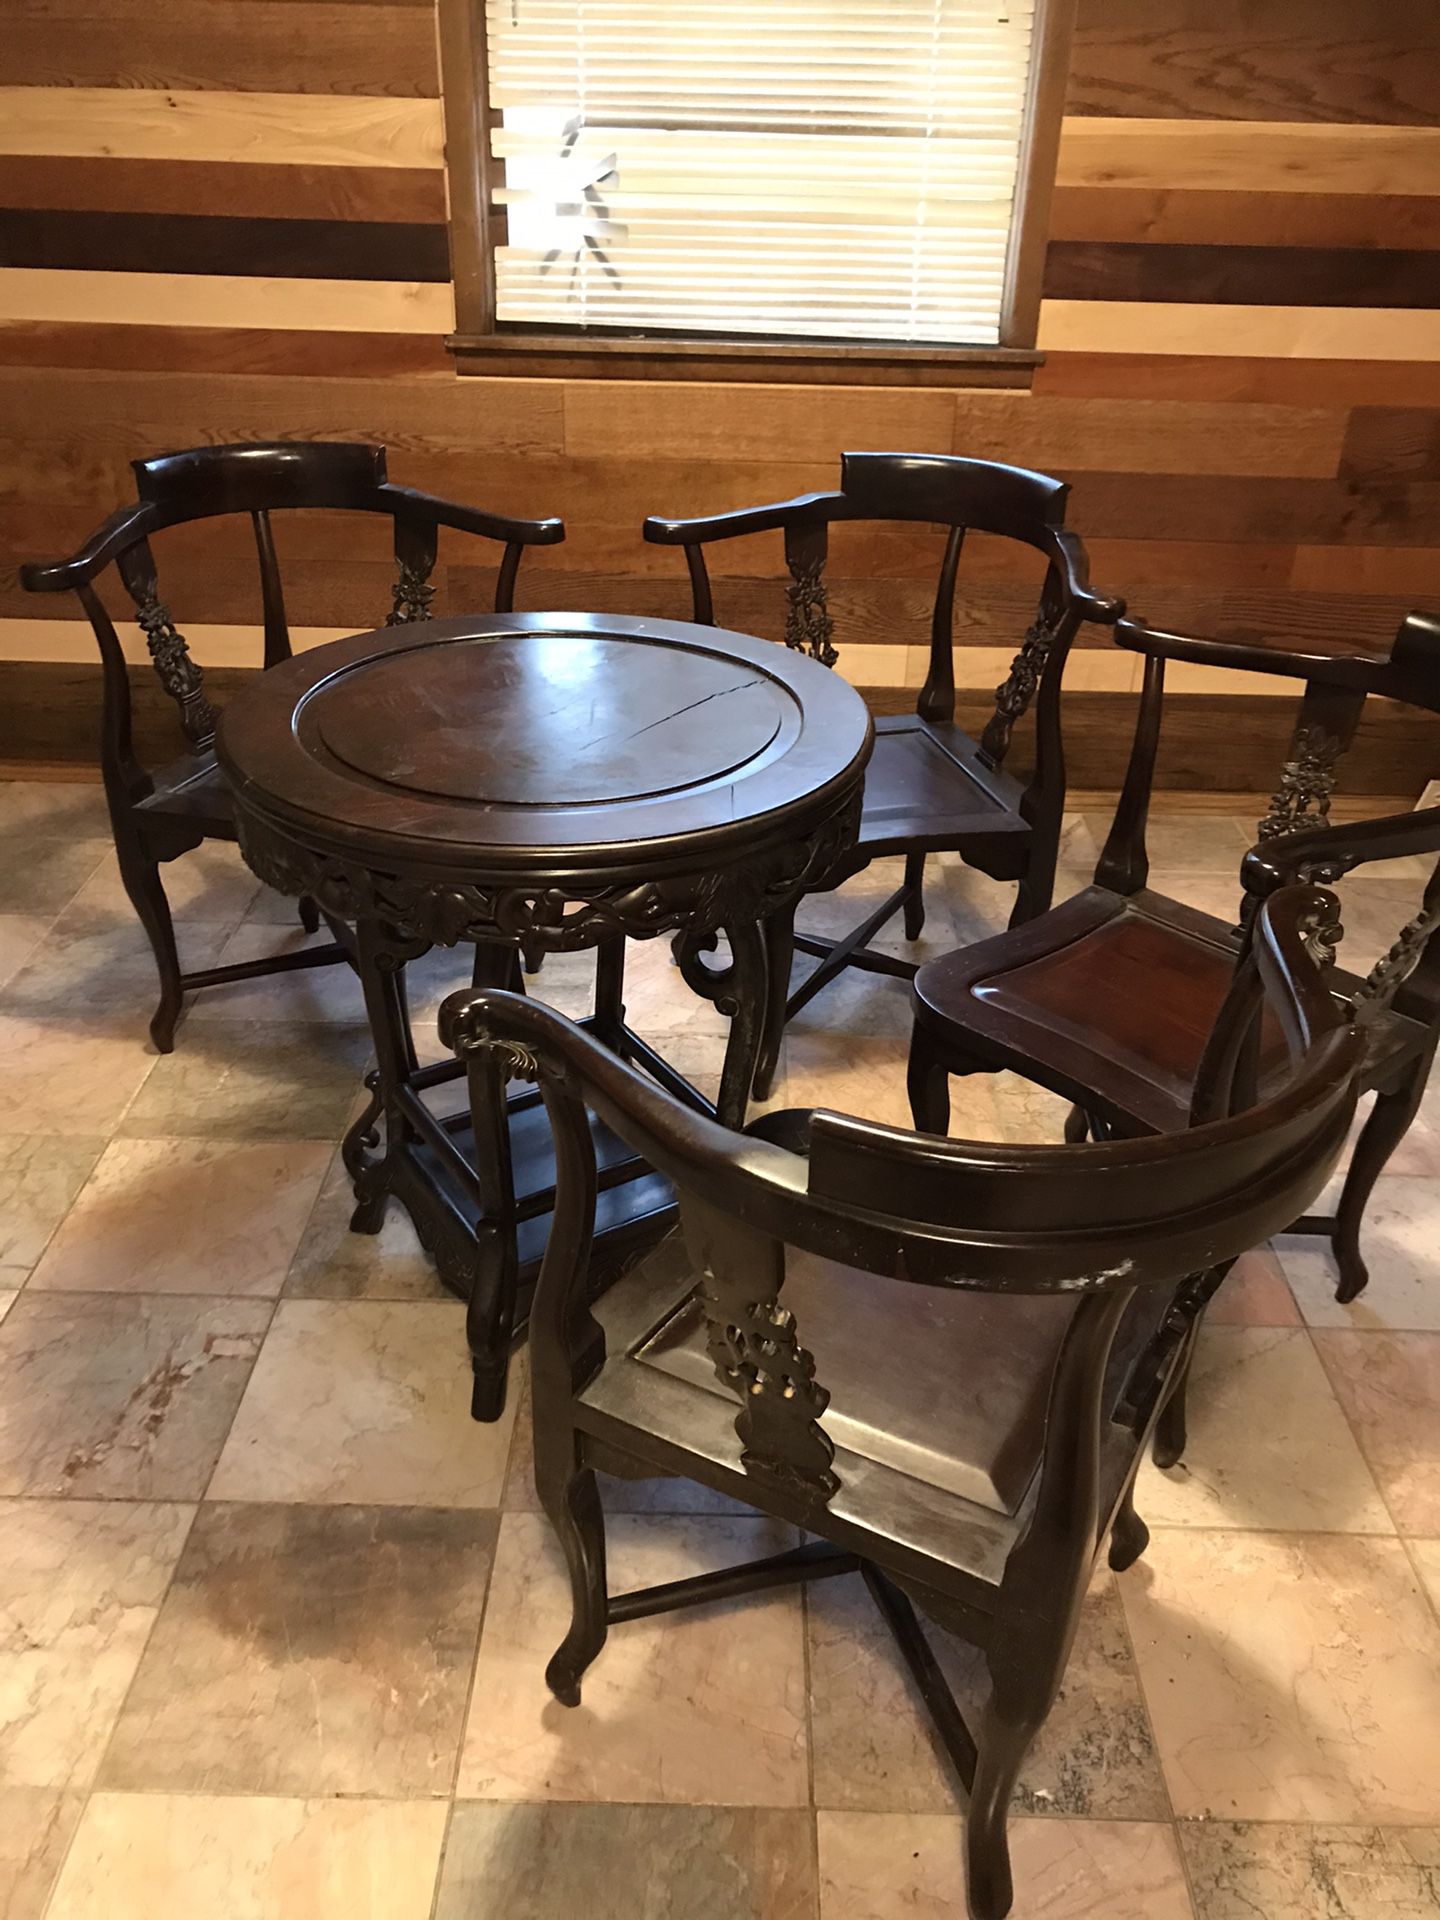 4 chairs and table with a wine rack all dark hand crafted wood